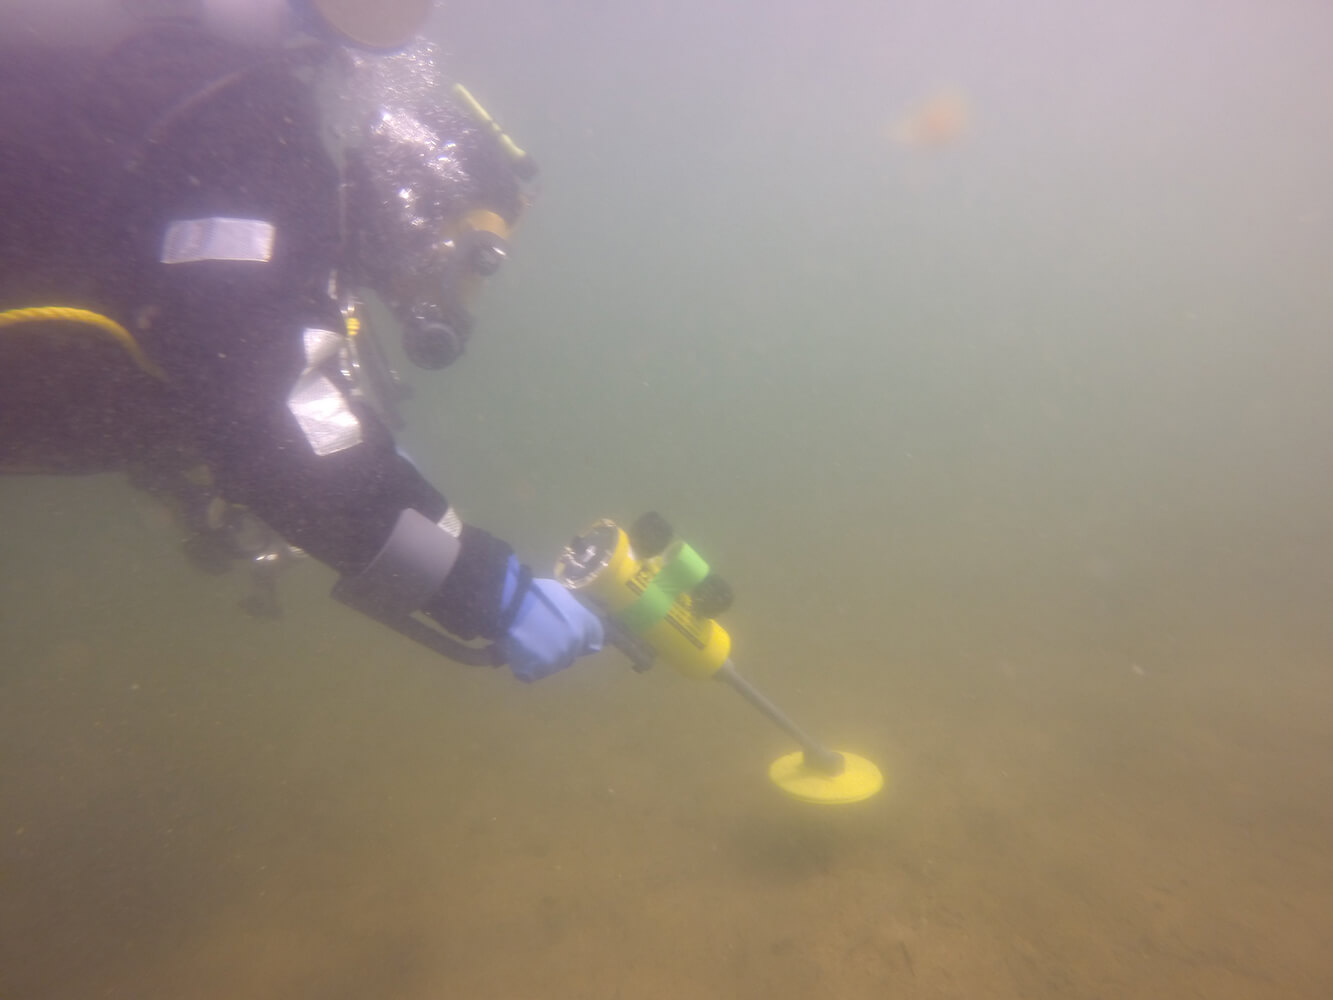 Diver under water using Search And Recovery Metal Detector (SAR)